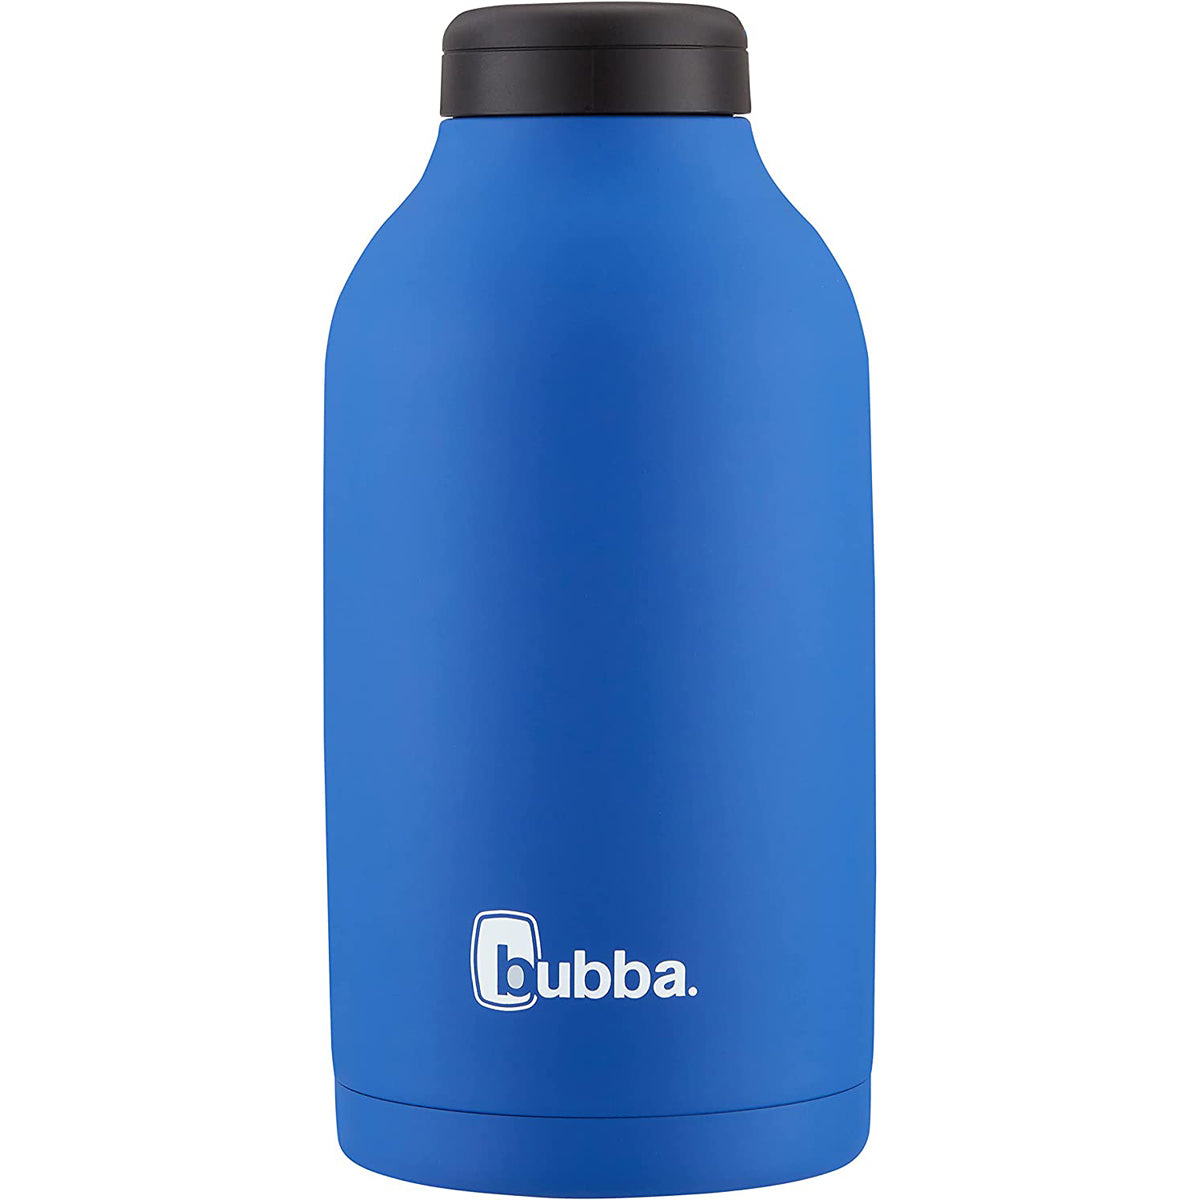 Bubba 64 oz. Radiant Insulated Stainless Steel Rubberized Growler - Cobalt Bubba